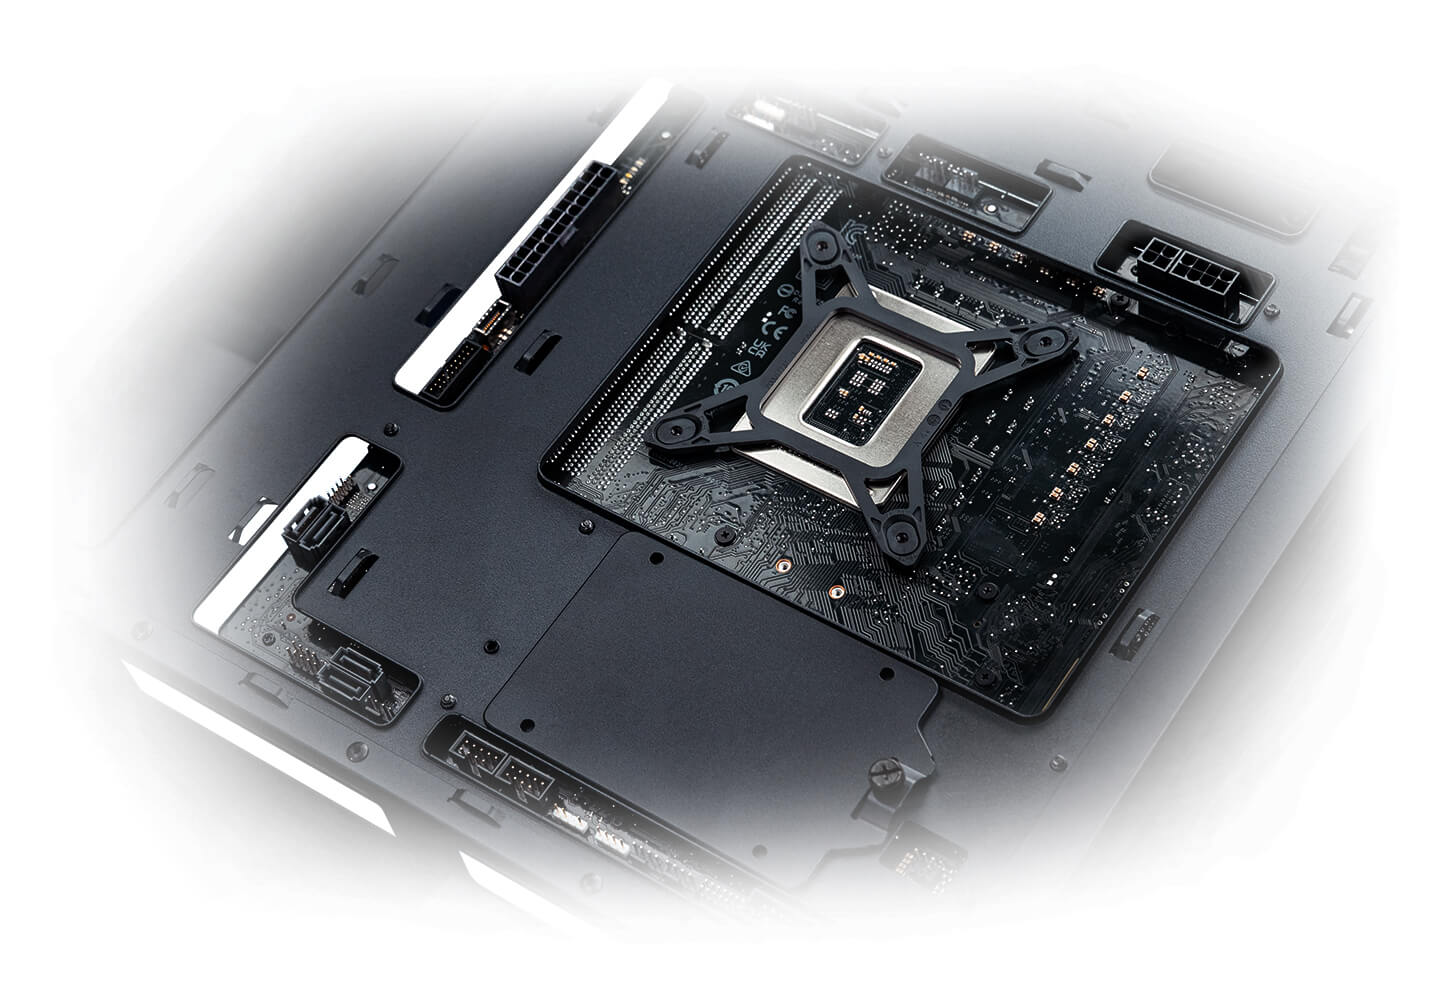 Hidden connector motherboard installed in the ASUS A23 PLUS PC case